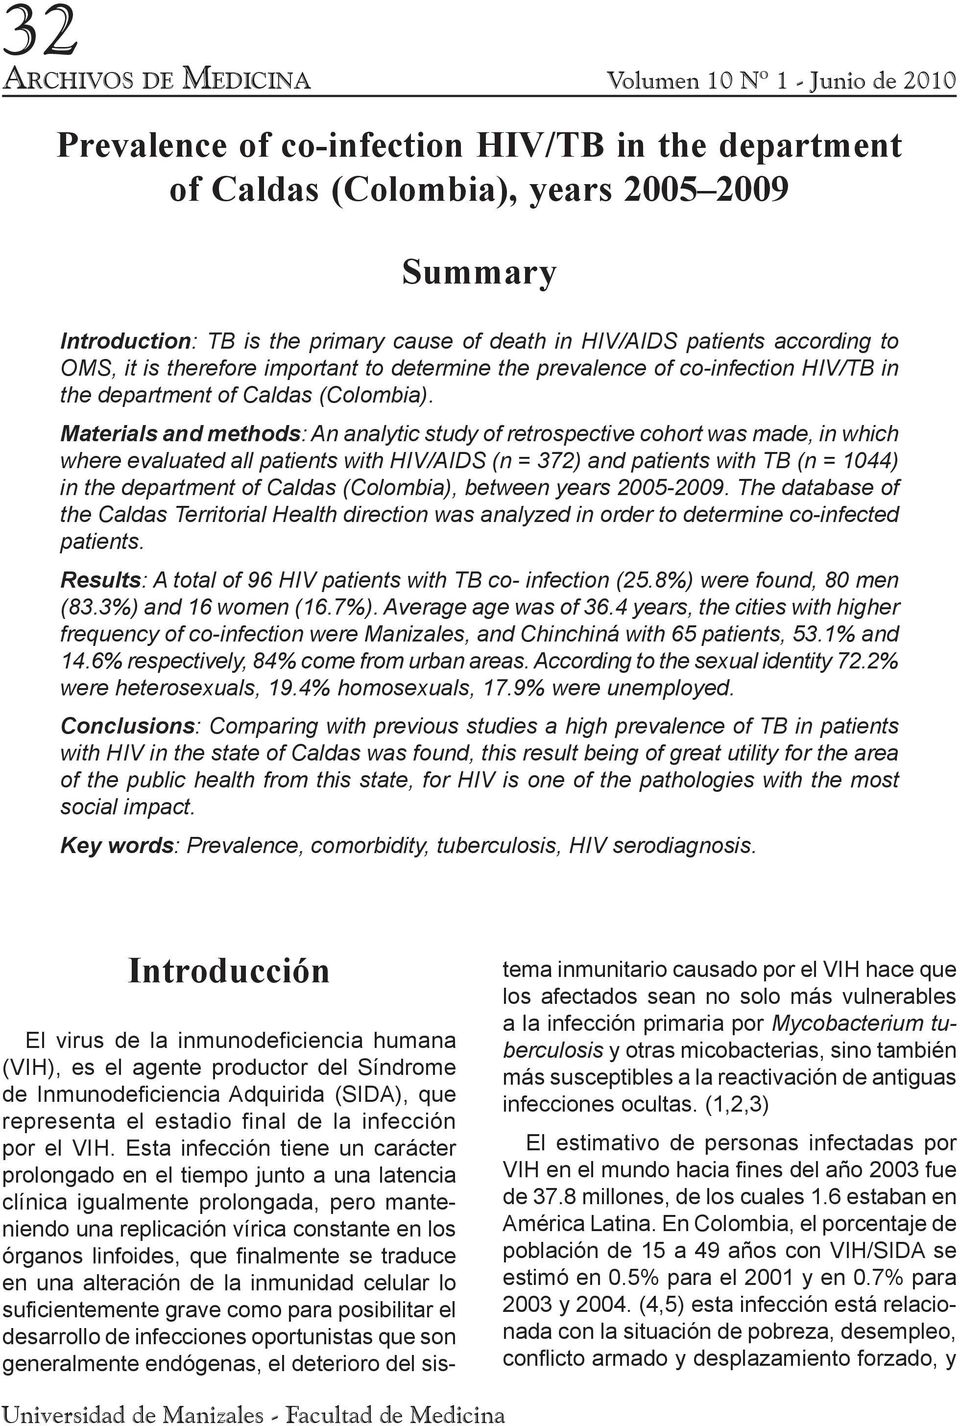 Materials and methods: An analytic study of retrospective cohort was made, in which where evaluated all patients with HIV/AIDS (n = 372) and patients with TB (n = 1044) in the department of Caldas